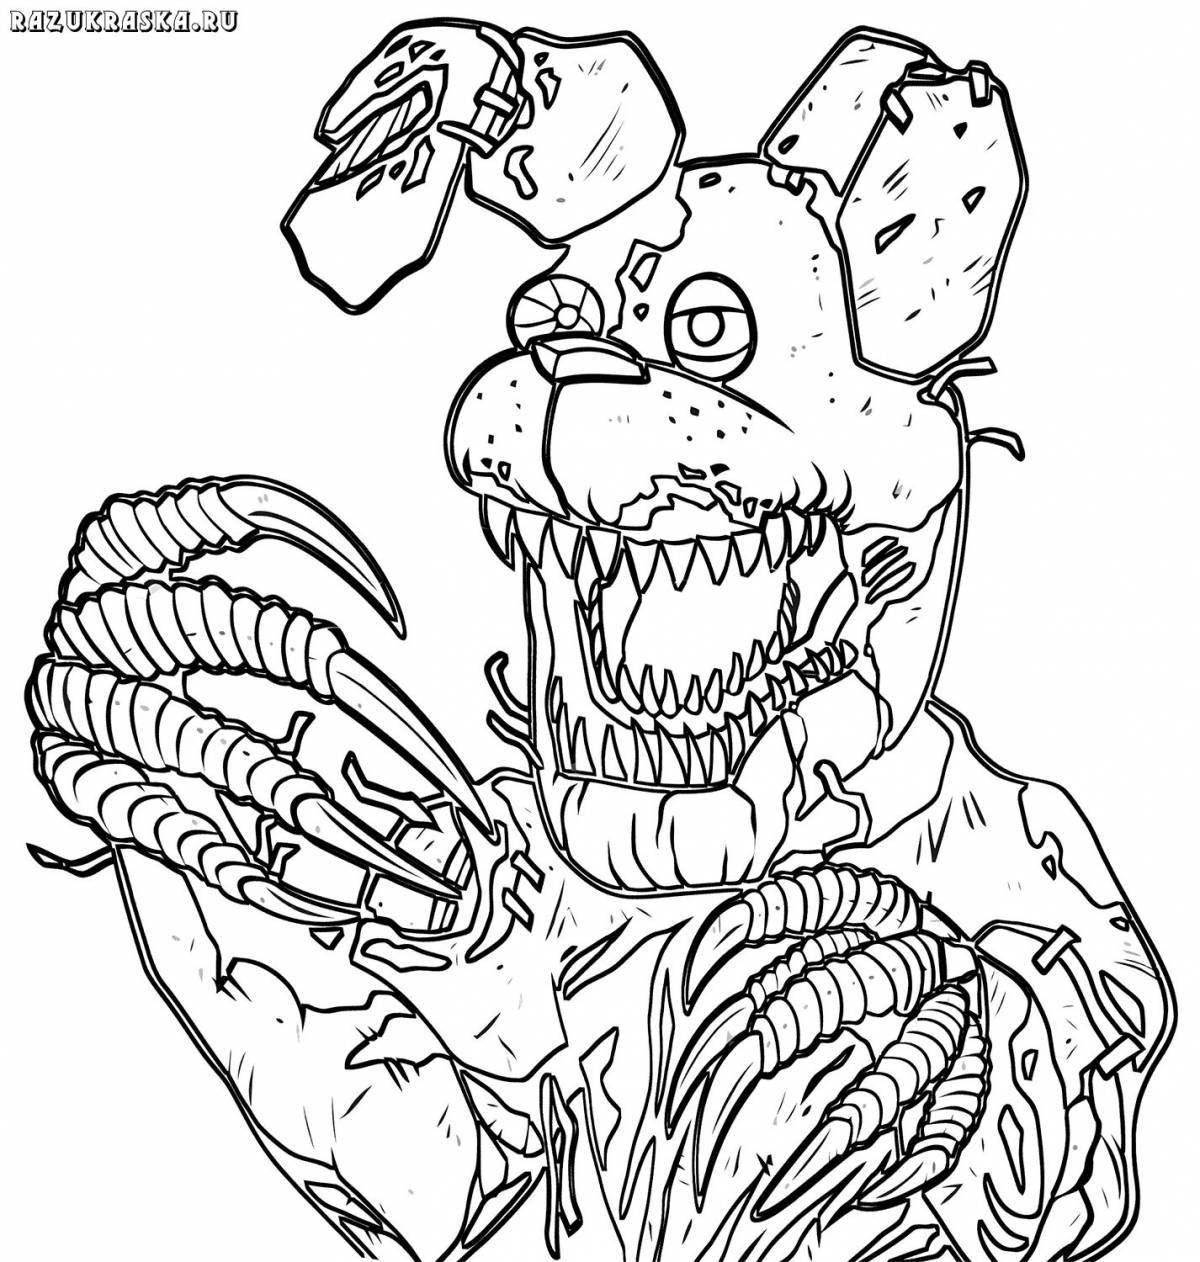 Animated animatronic seal coloring page